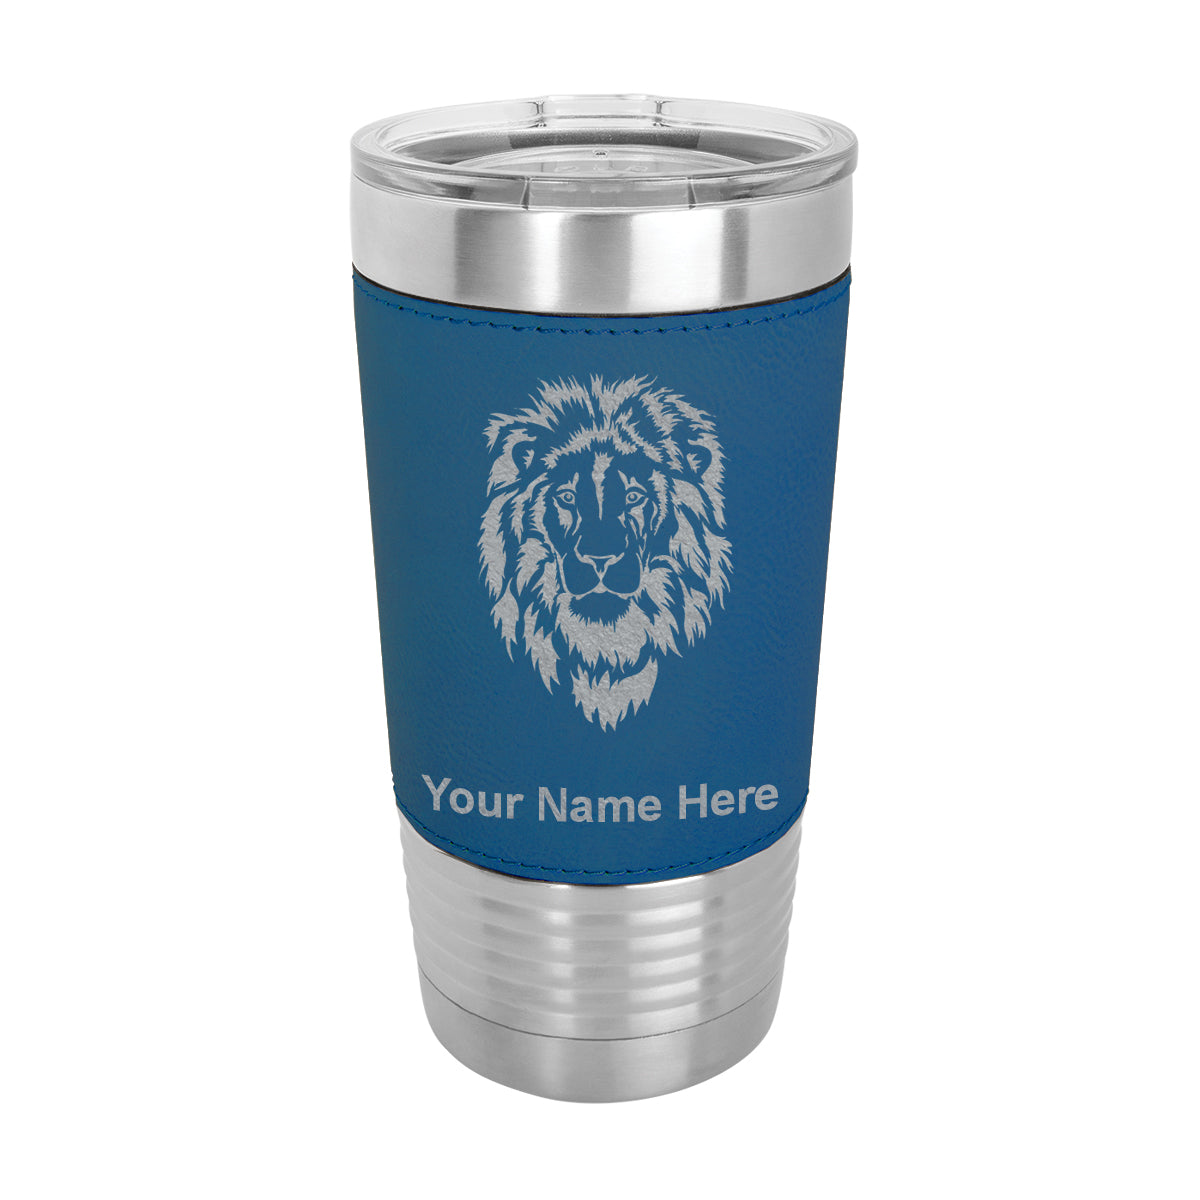 20oz Faux Leather Tumbler Mug, Lion Head, Personalized Engraving Included - LaserGram Custom Engraved Gifts